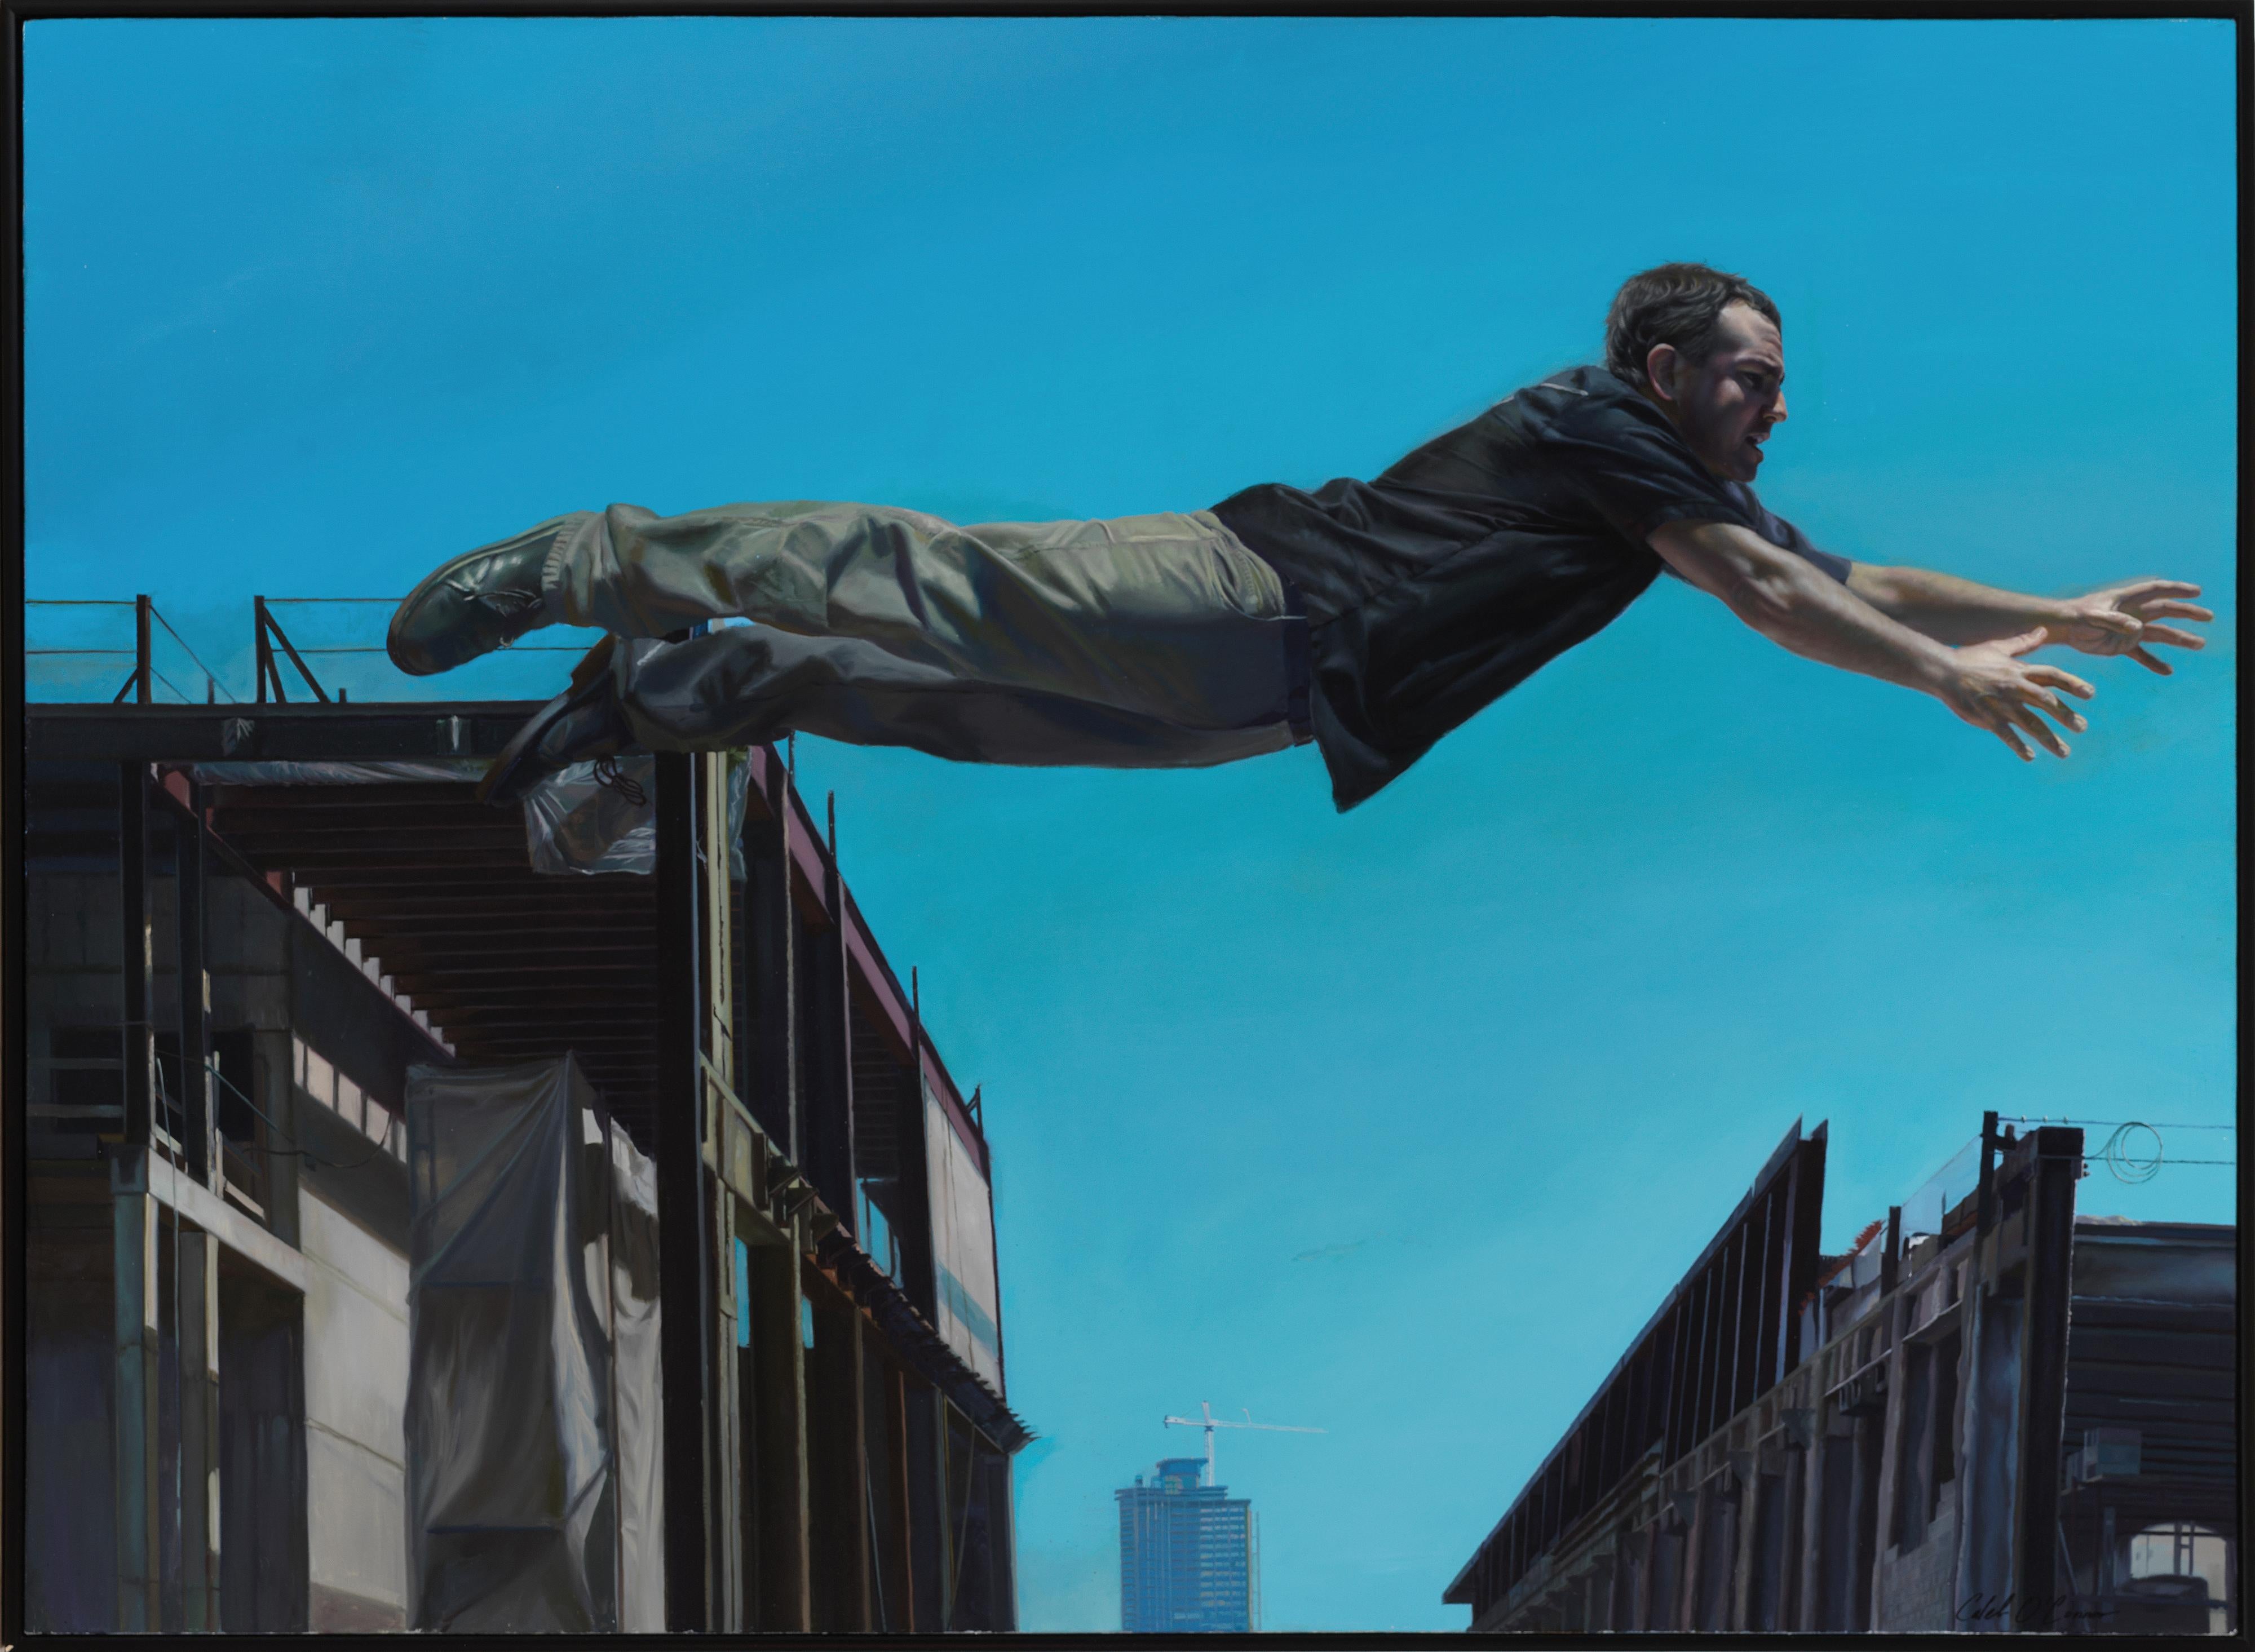 Caleb O'Connor Figurative Painting - Chasing the Edge - Large Scale Oil Painting of Man Leaping Between Buildings